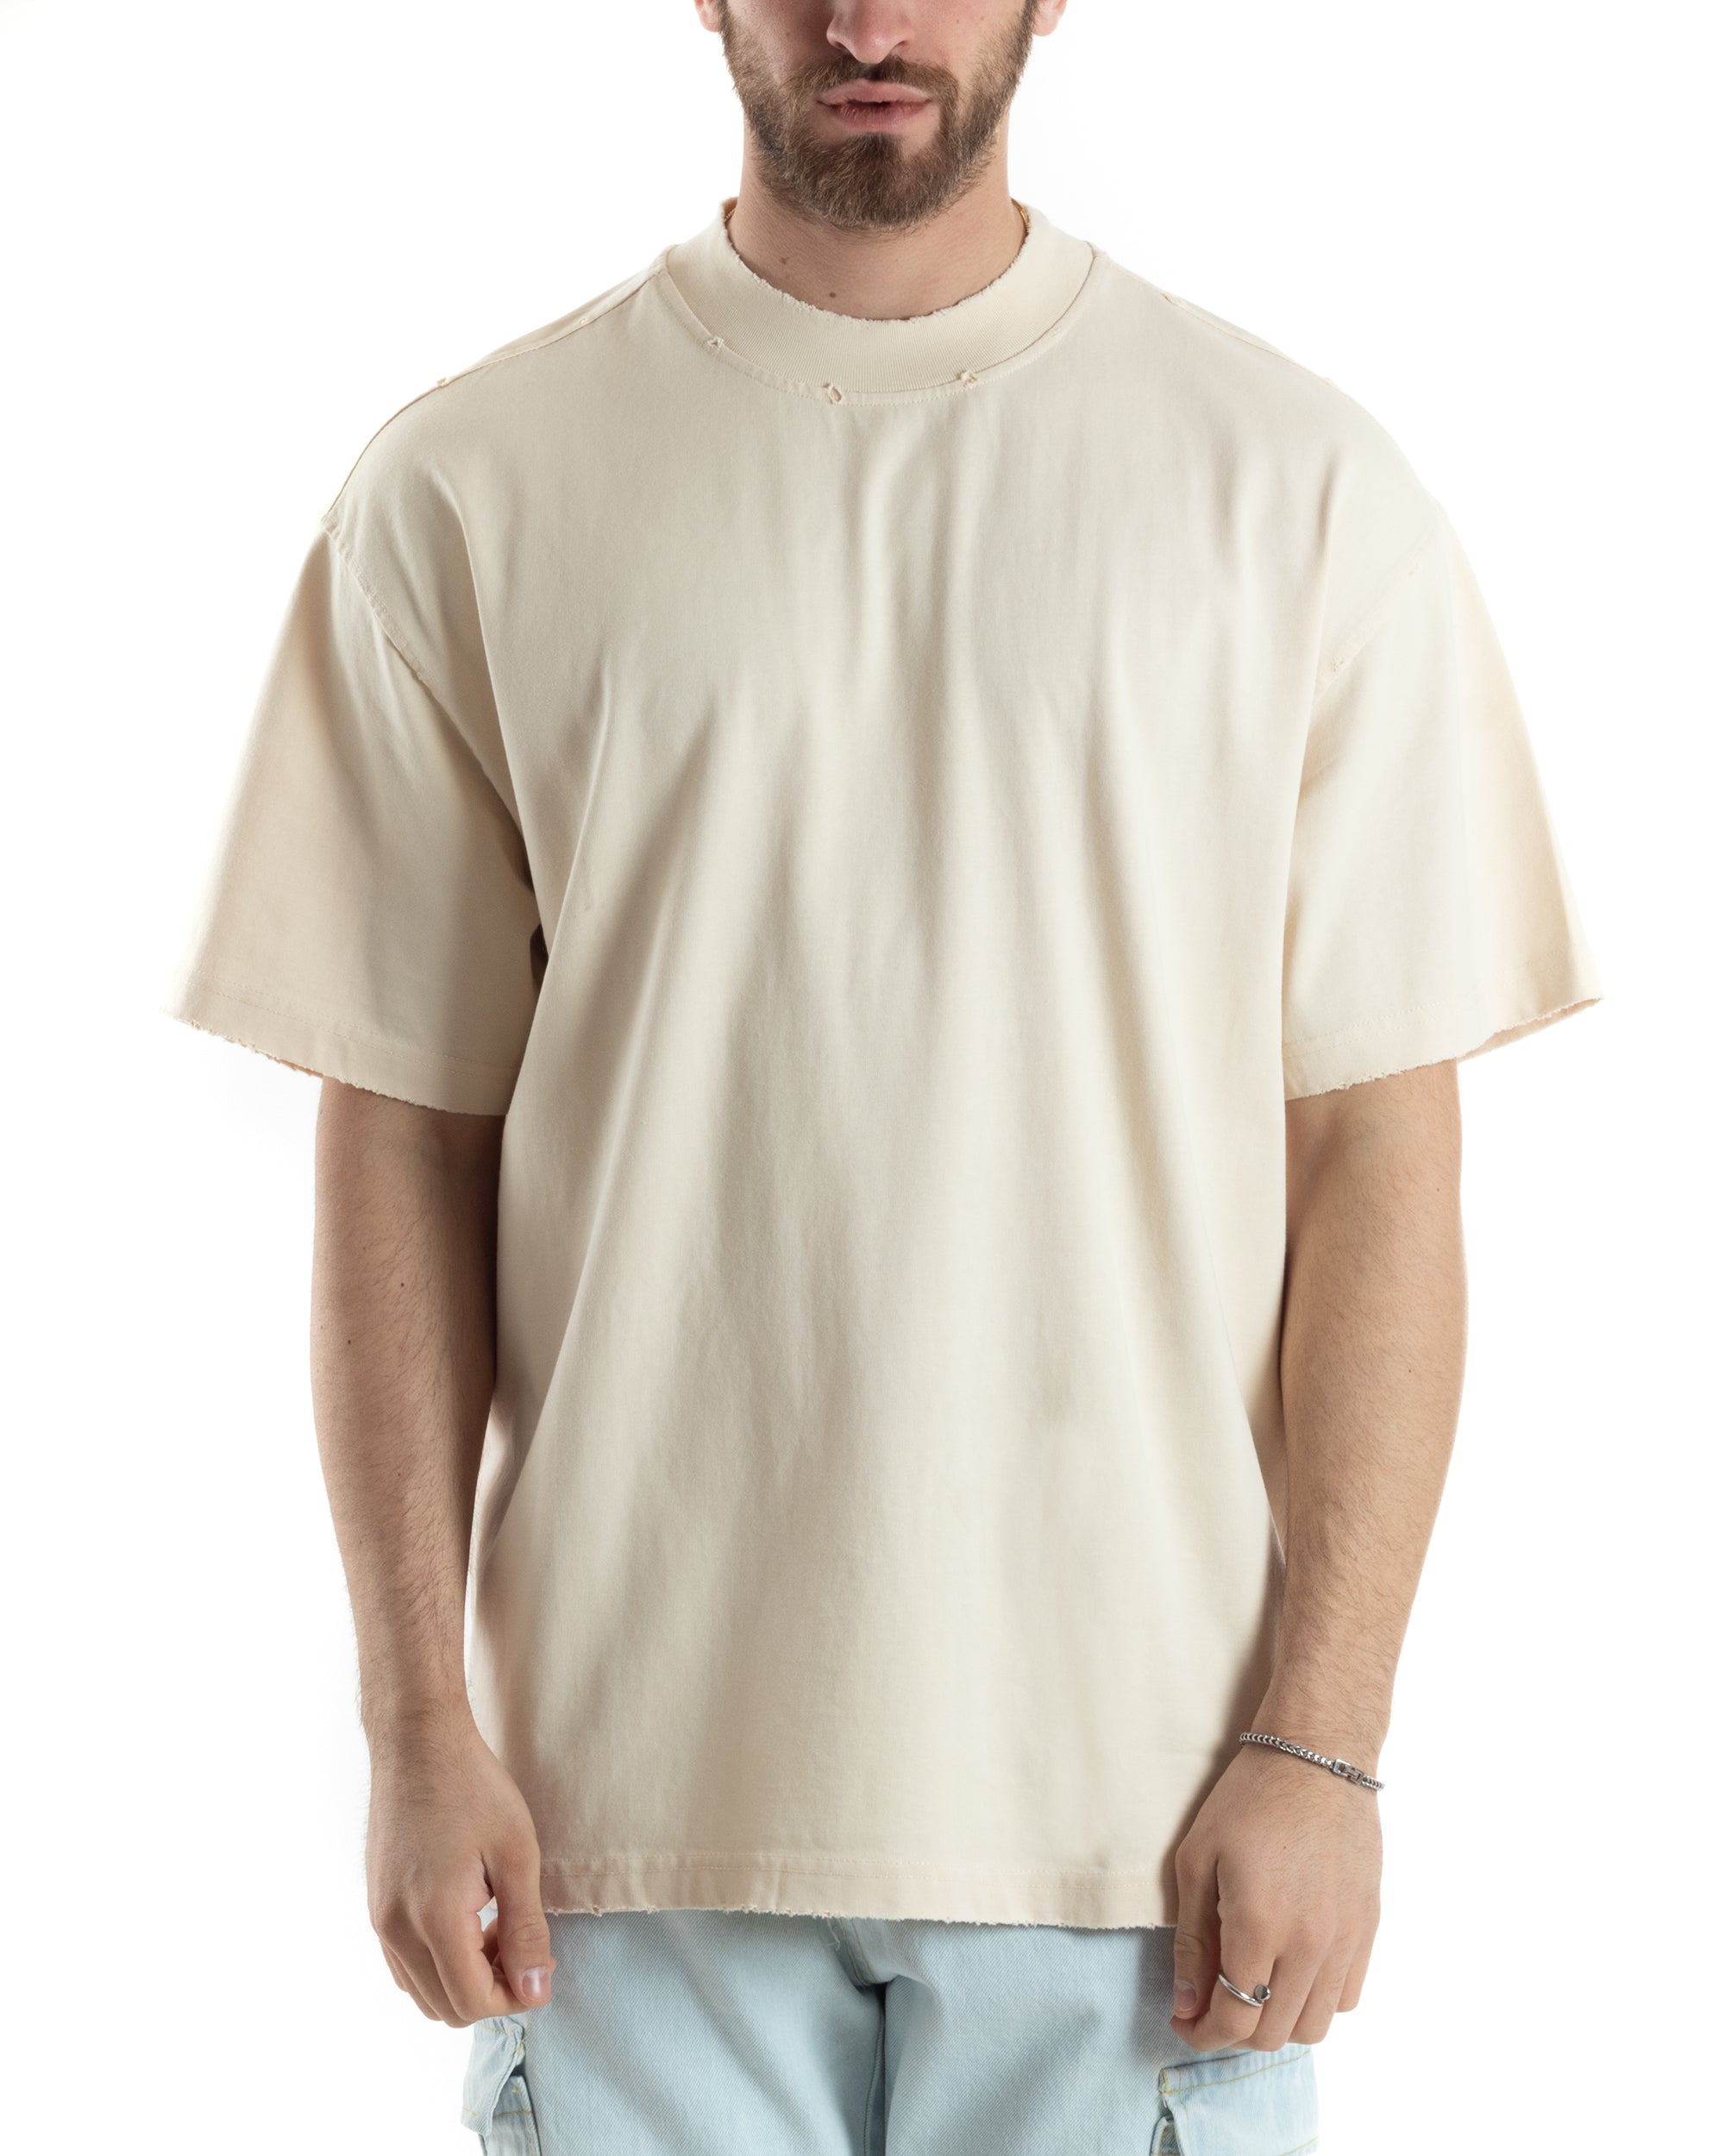 T-shirt Uomo Girocollo Boxy Fit Cotone Basic Con Rotture Relaxed Fit Gola Alta Beige GIOSAL-TS3015A